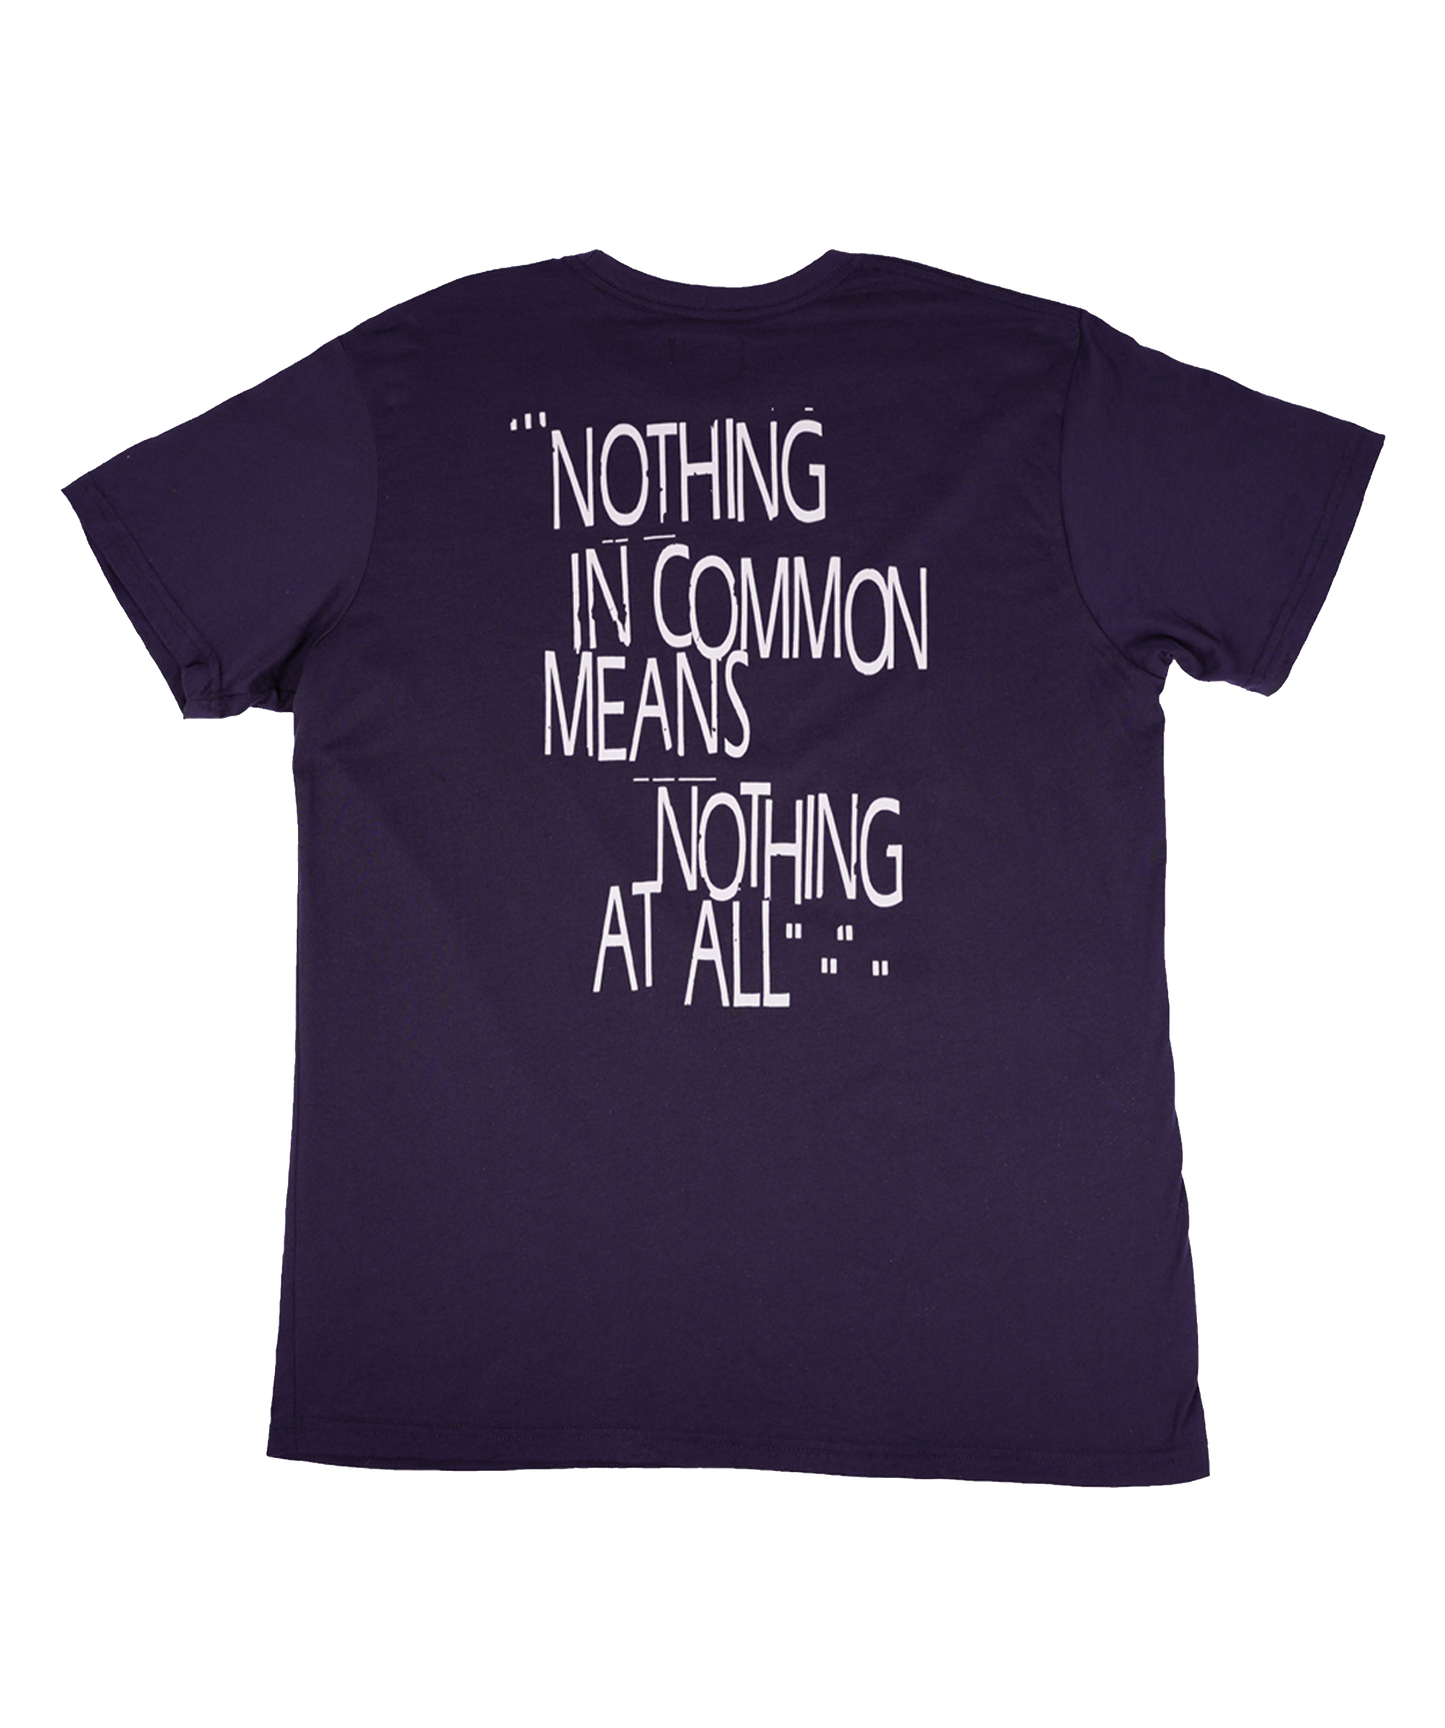 Oxford Pennant Nothing In Common Means Nothing At All Tee